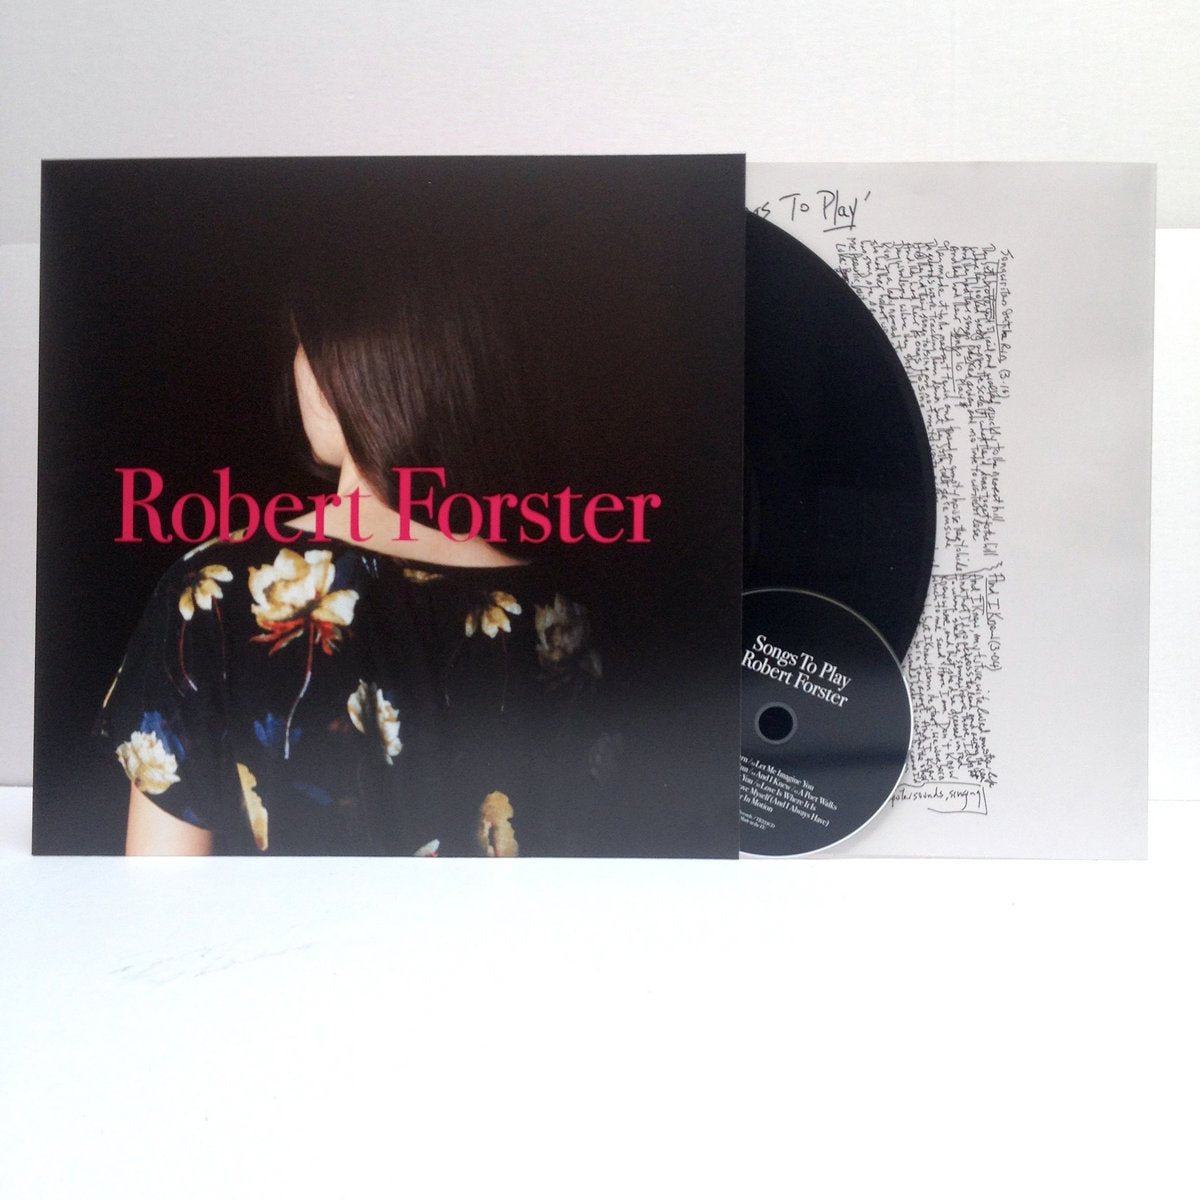 Robert Forster - Songs To Play LP & CD